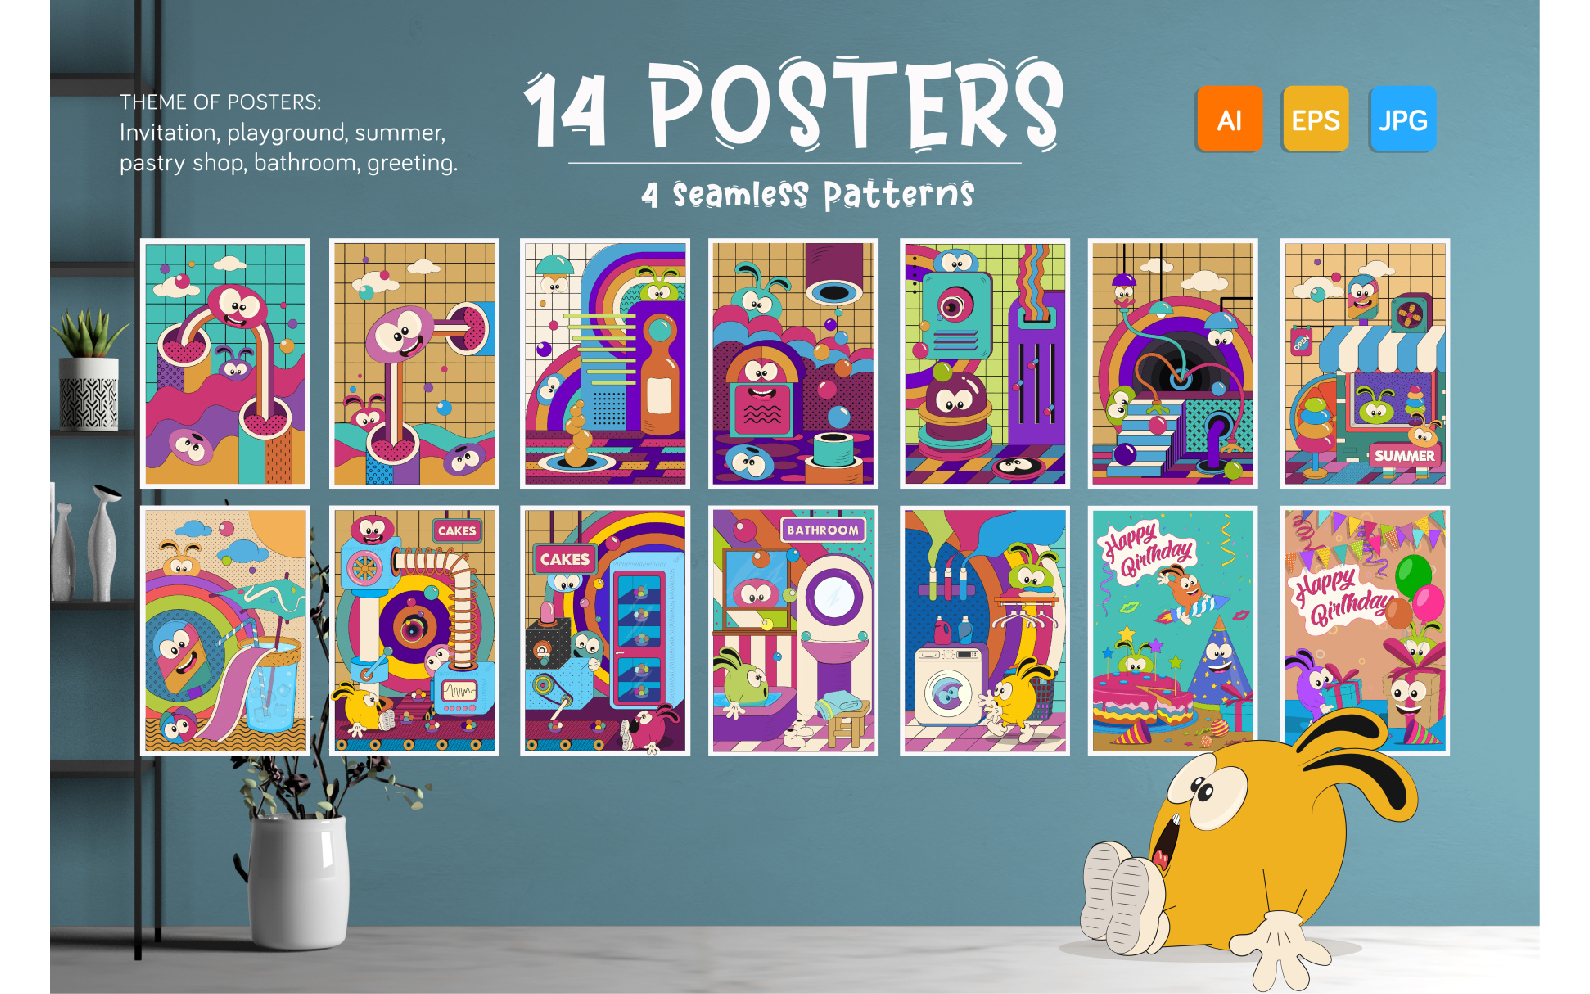 14 Children's Cards with Characters, 4 Seamless Patterns. Vectors